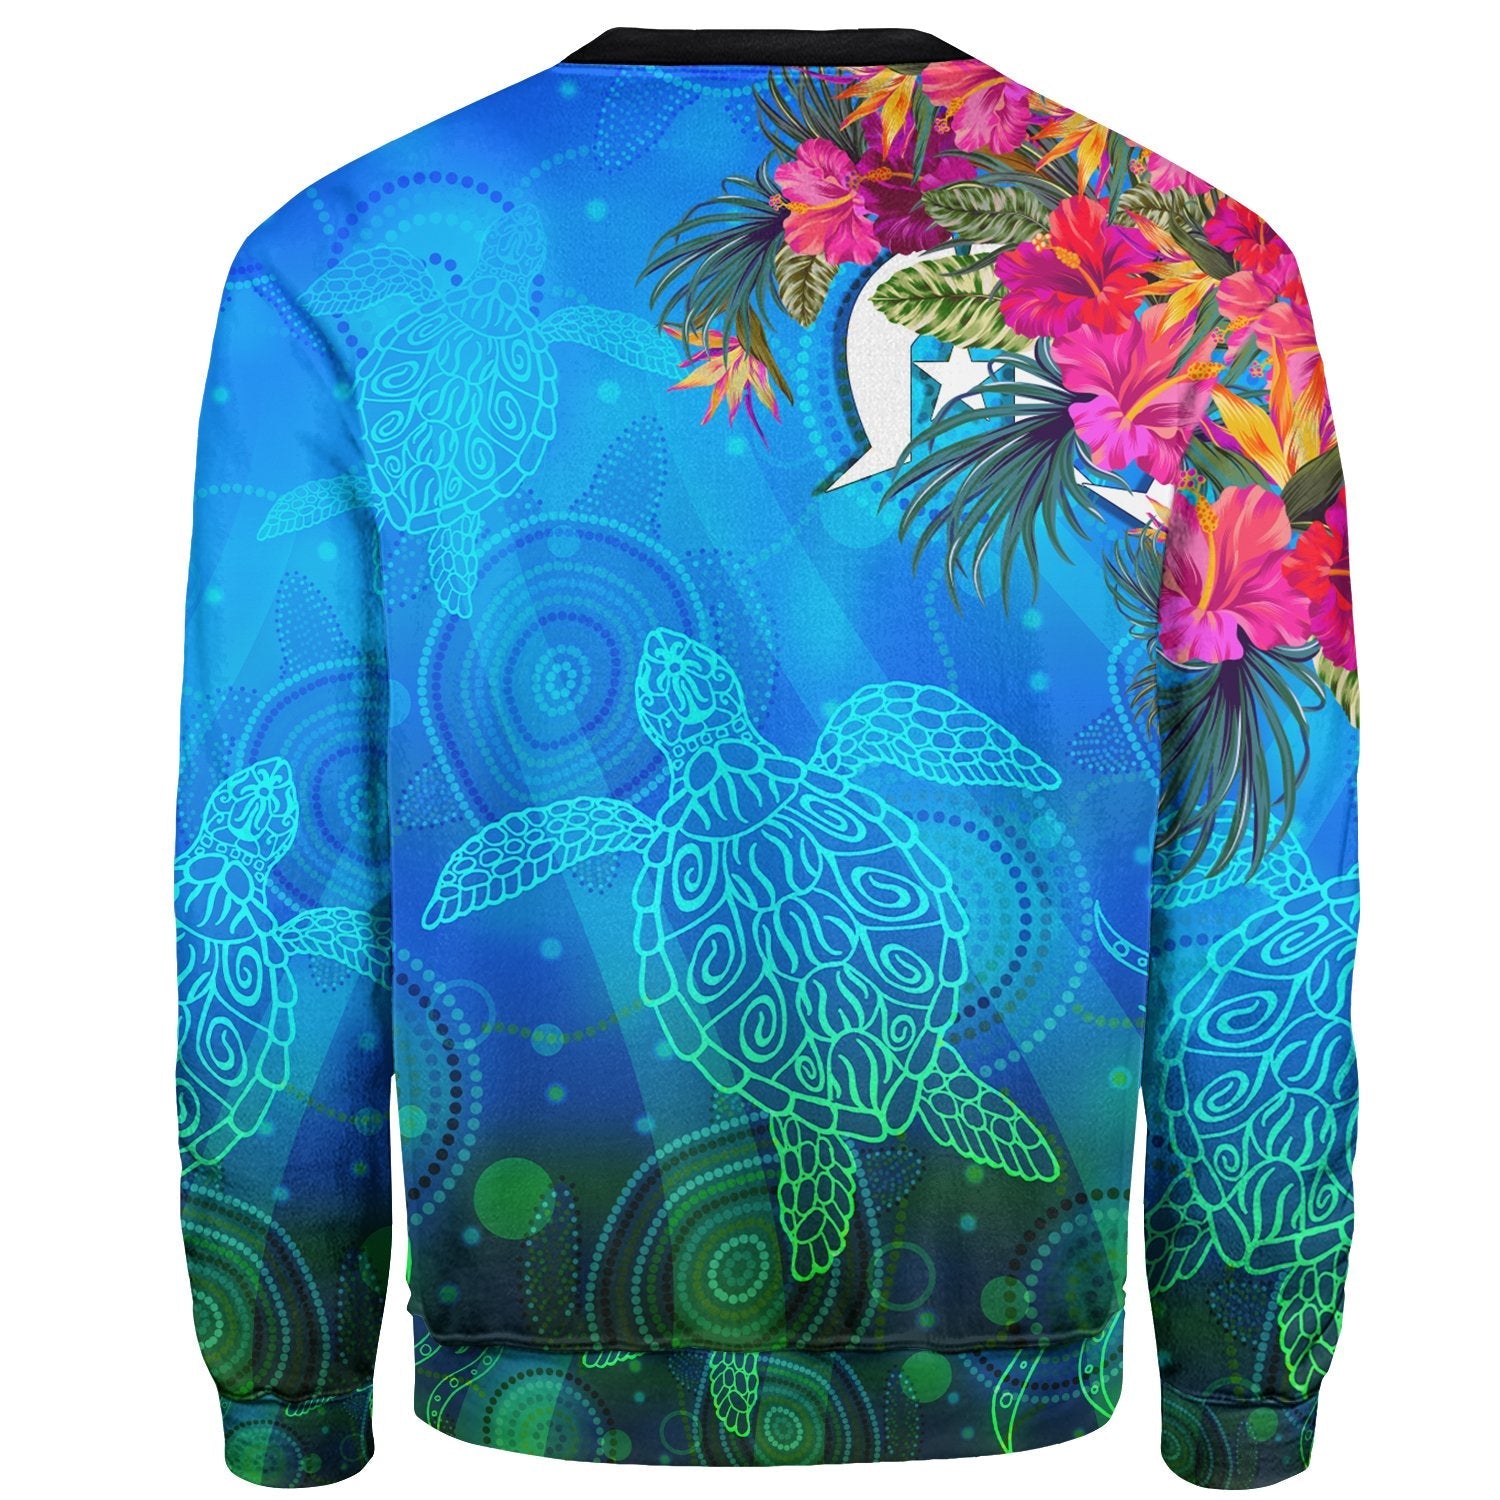 sweater-shirt-torres-strait-blue-sea-with-hibiscus